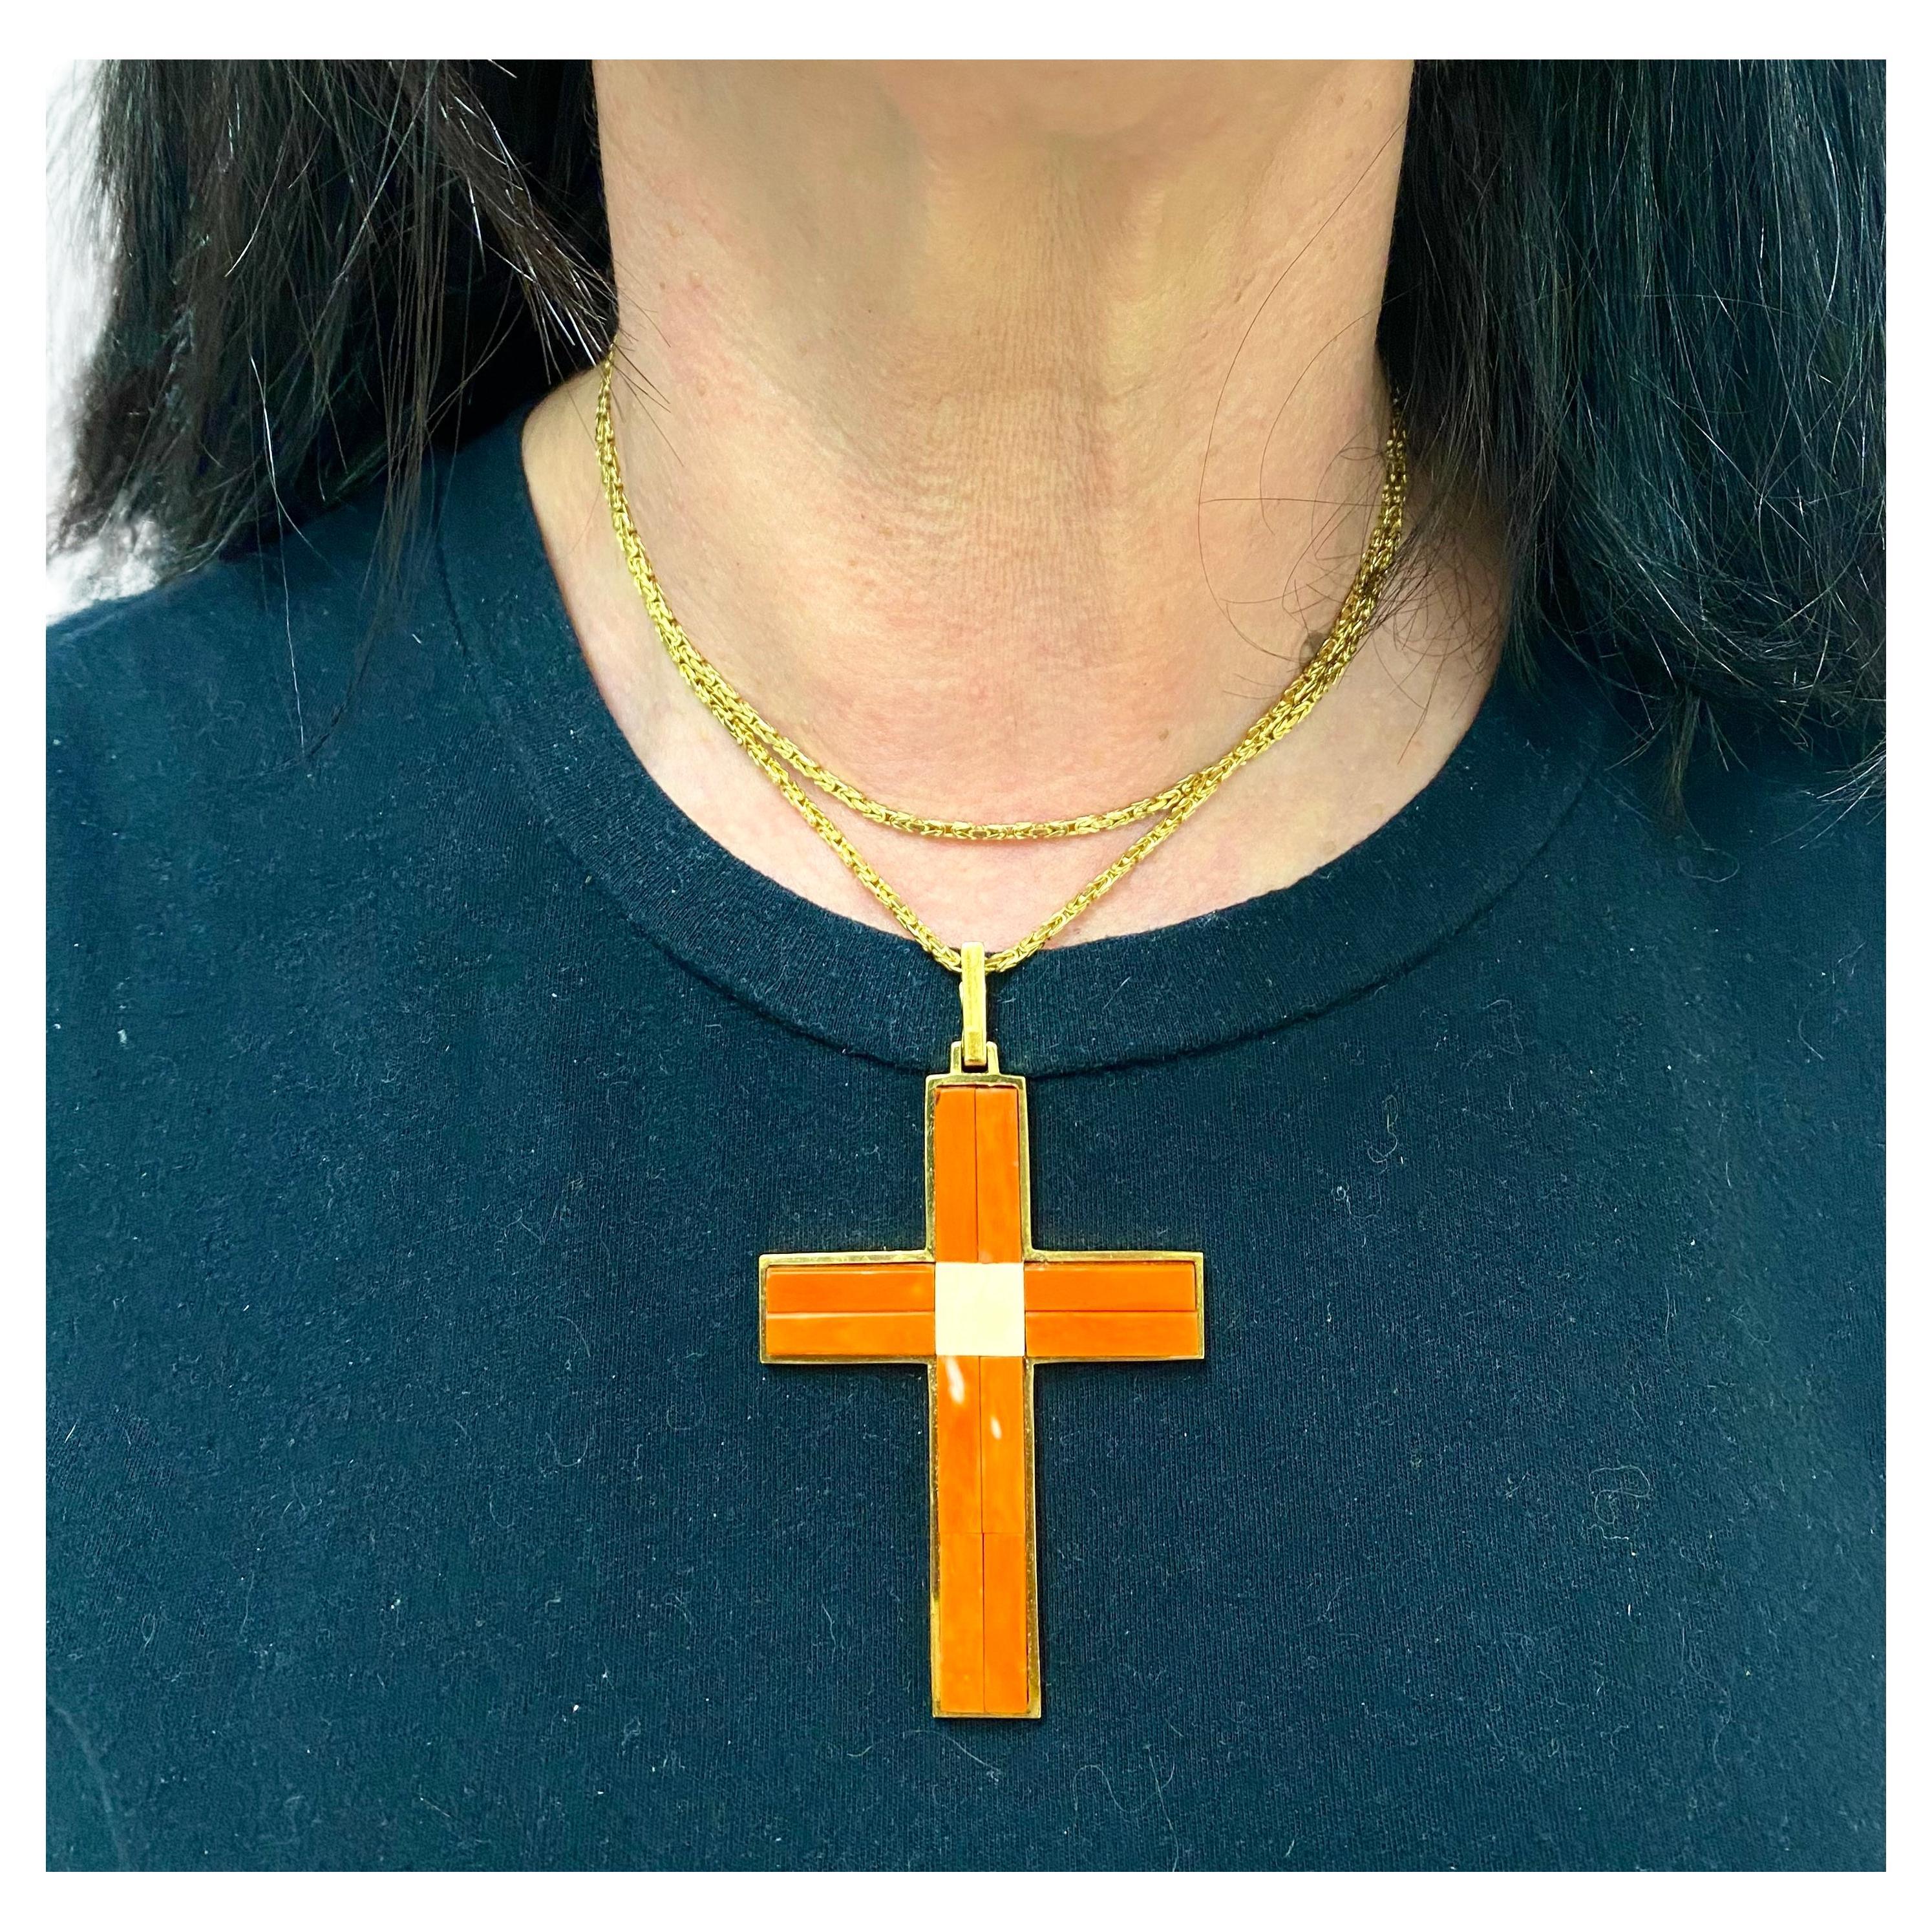 An impressive vintage coral cross pendant, made of 18k gold. The coral planks are staged in the gold base that is equipped with a large rectangular loop. The center is crafted of the contrasting white coral, which makes the cross look even brighter